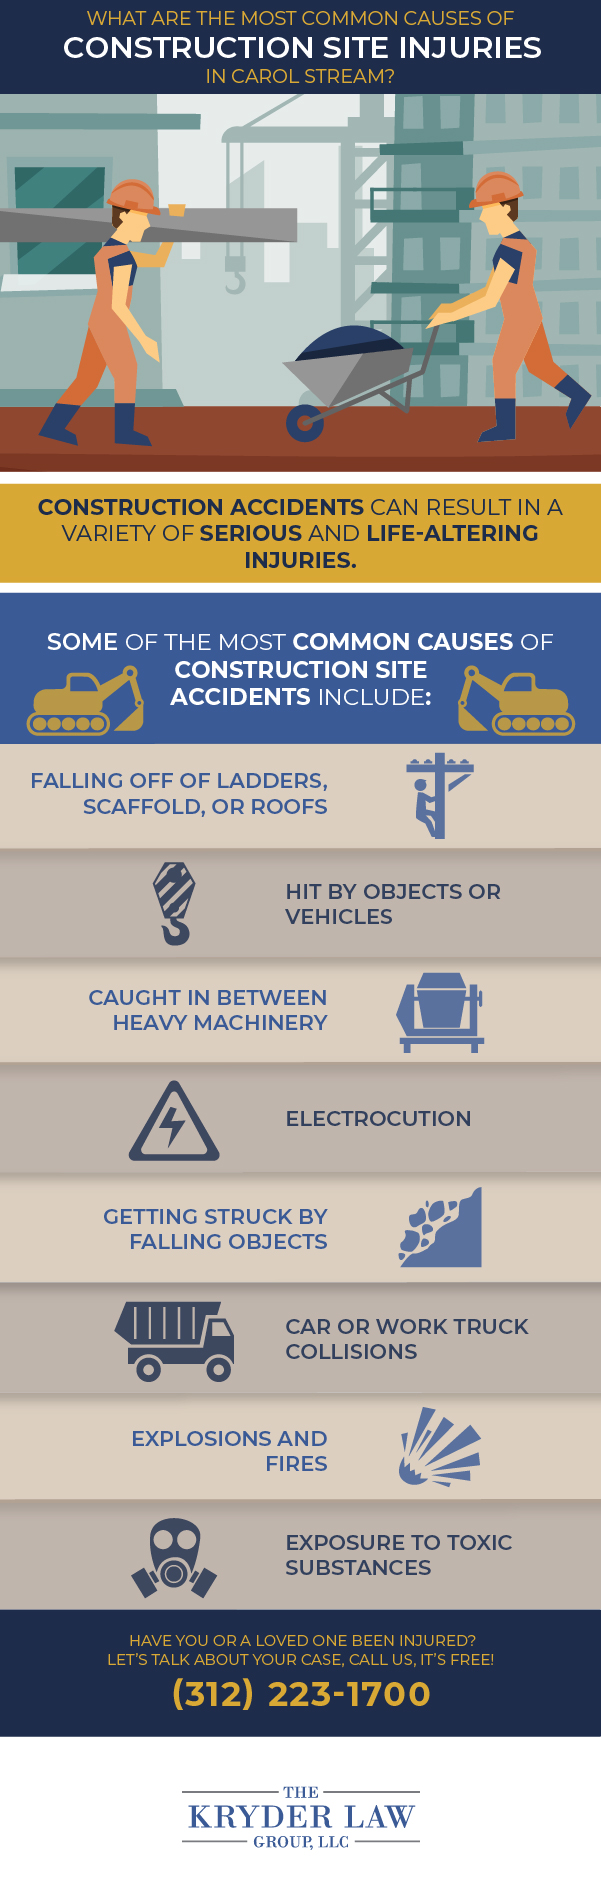 The Benefits of Hiring a Carol Stream Construction Accident Lawyer Infographic